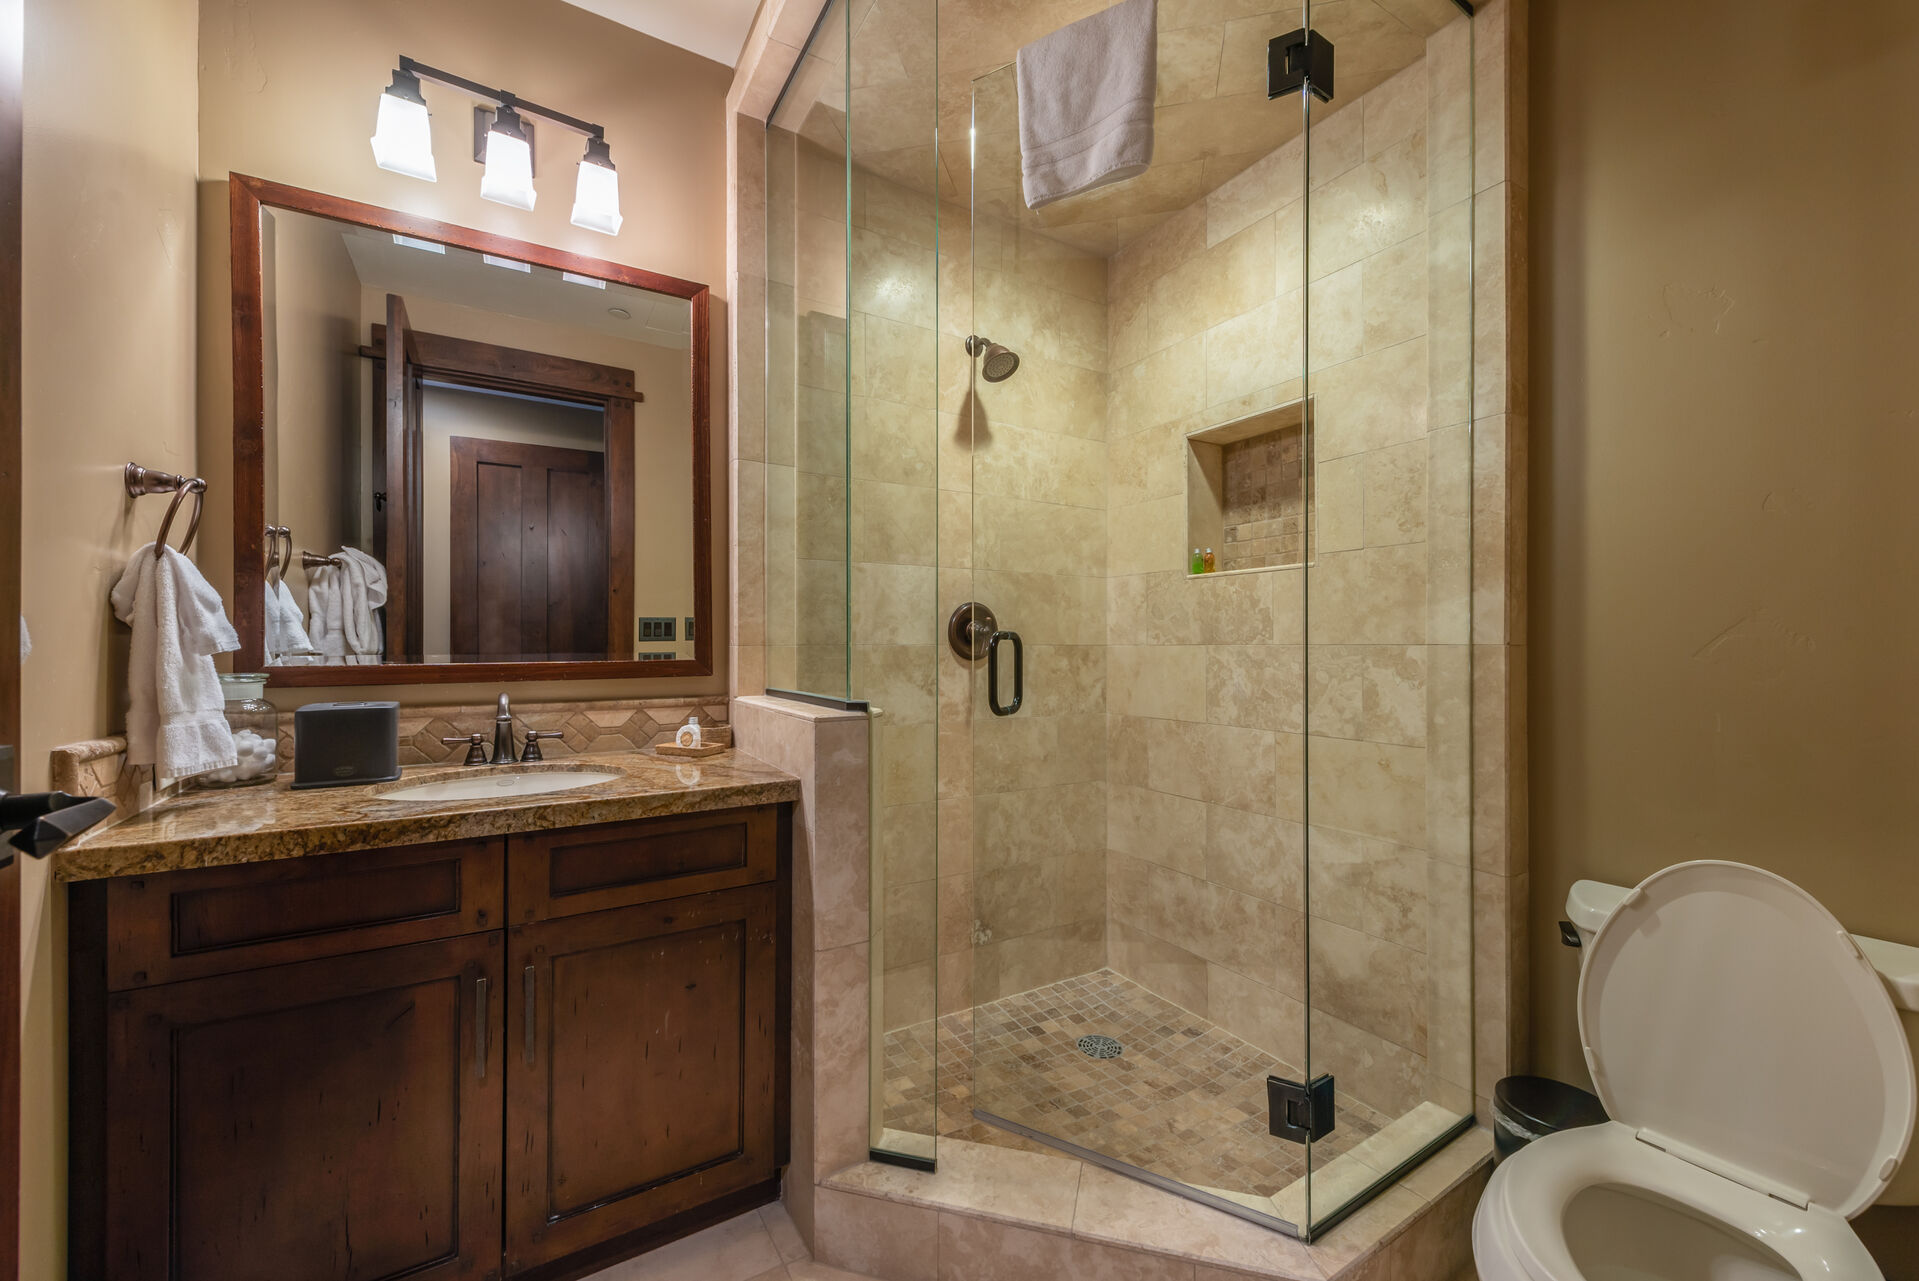 Second master bathroom with stone shower